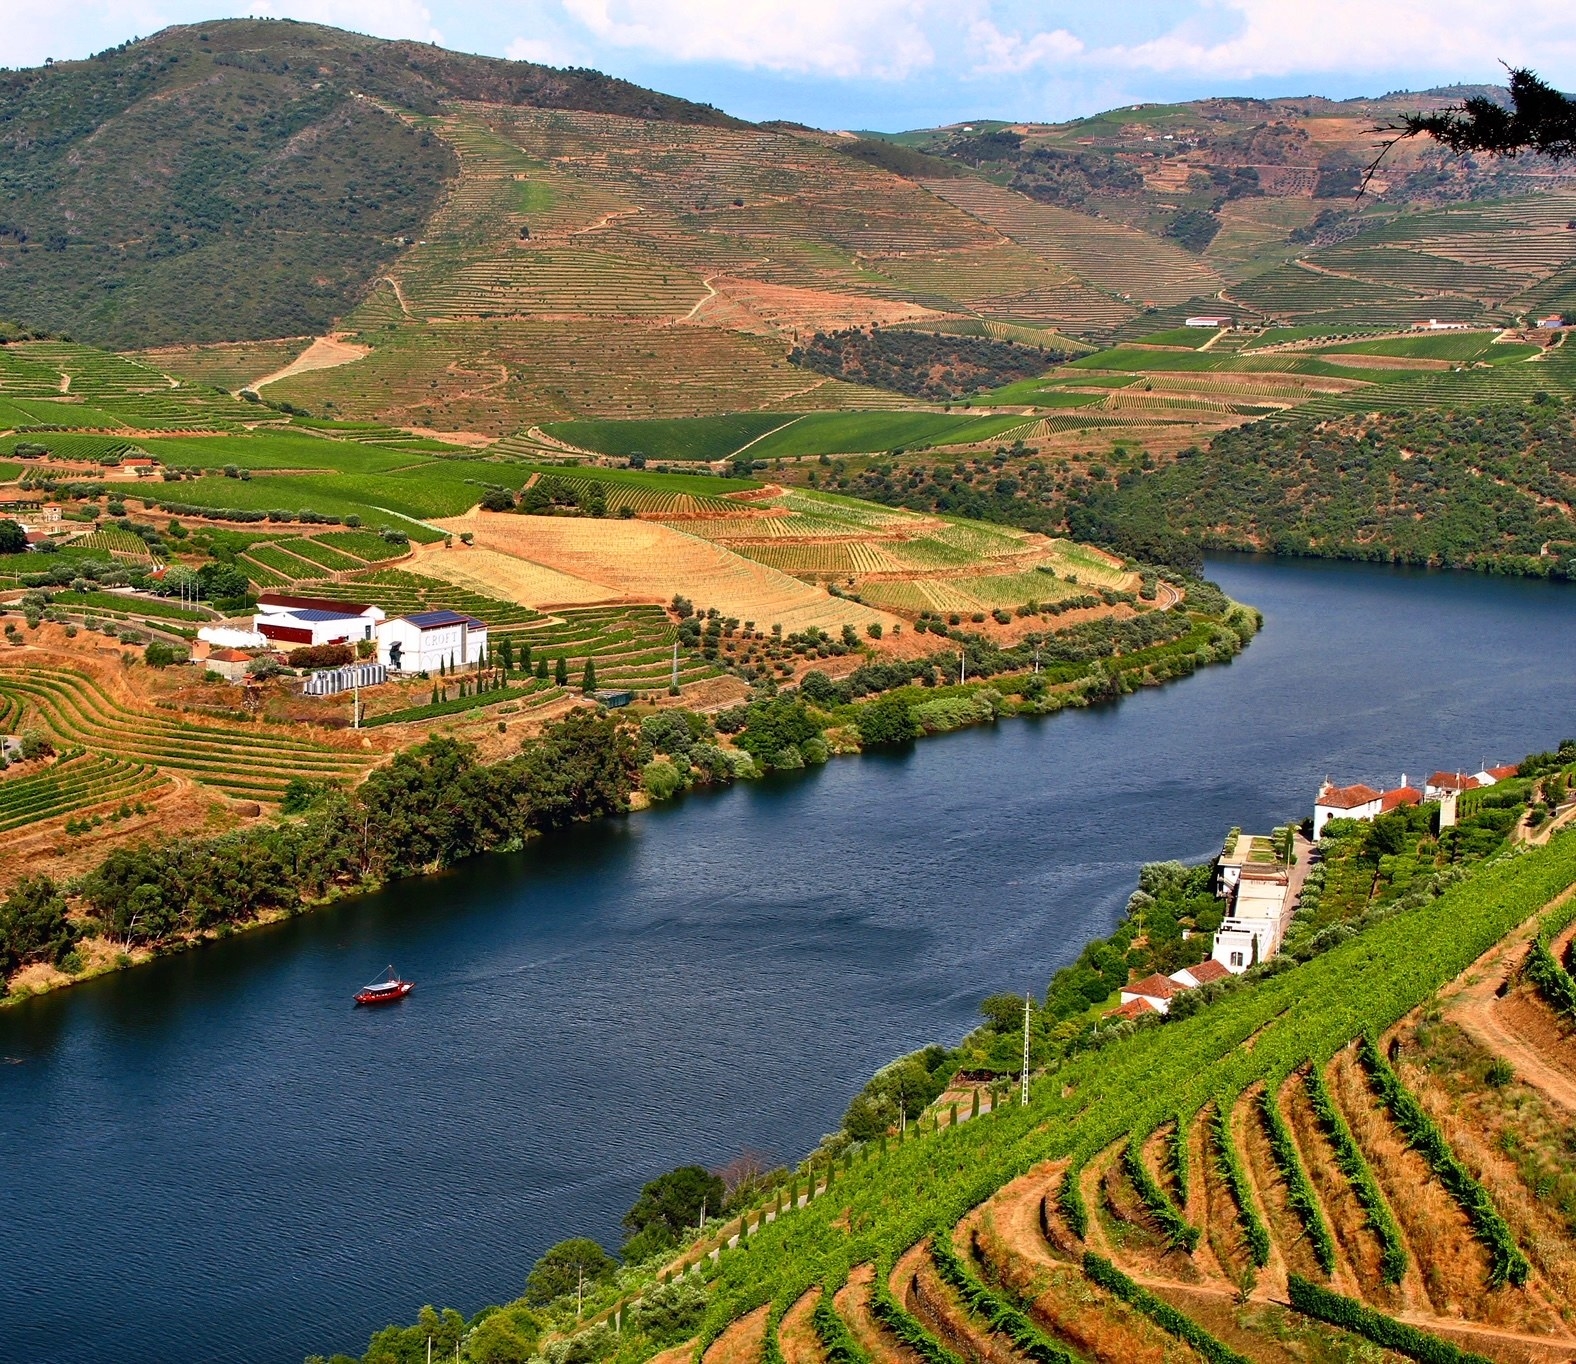 A view of the Douro River in Portugal